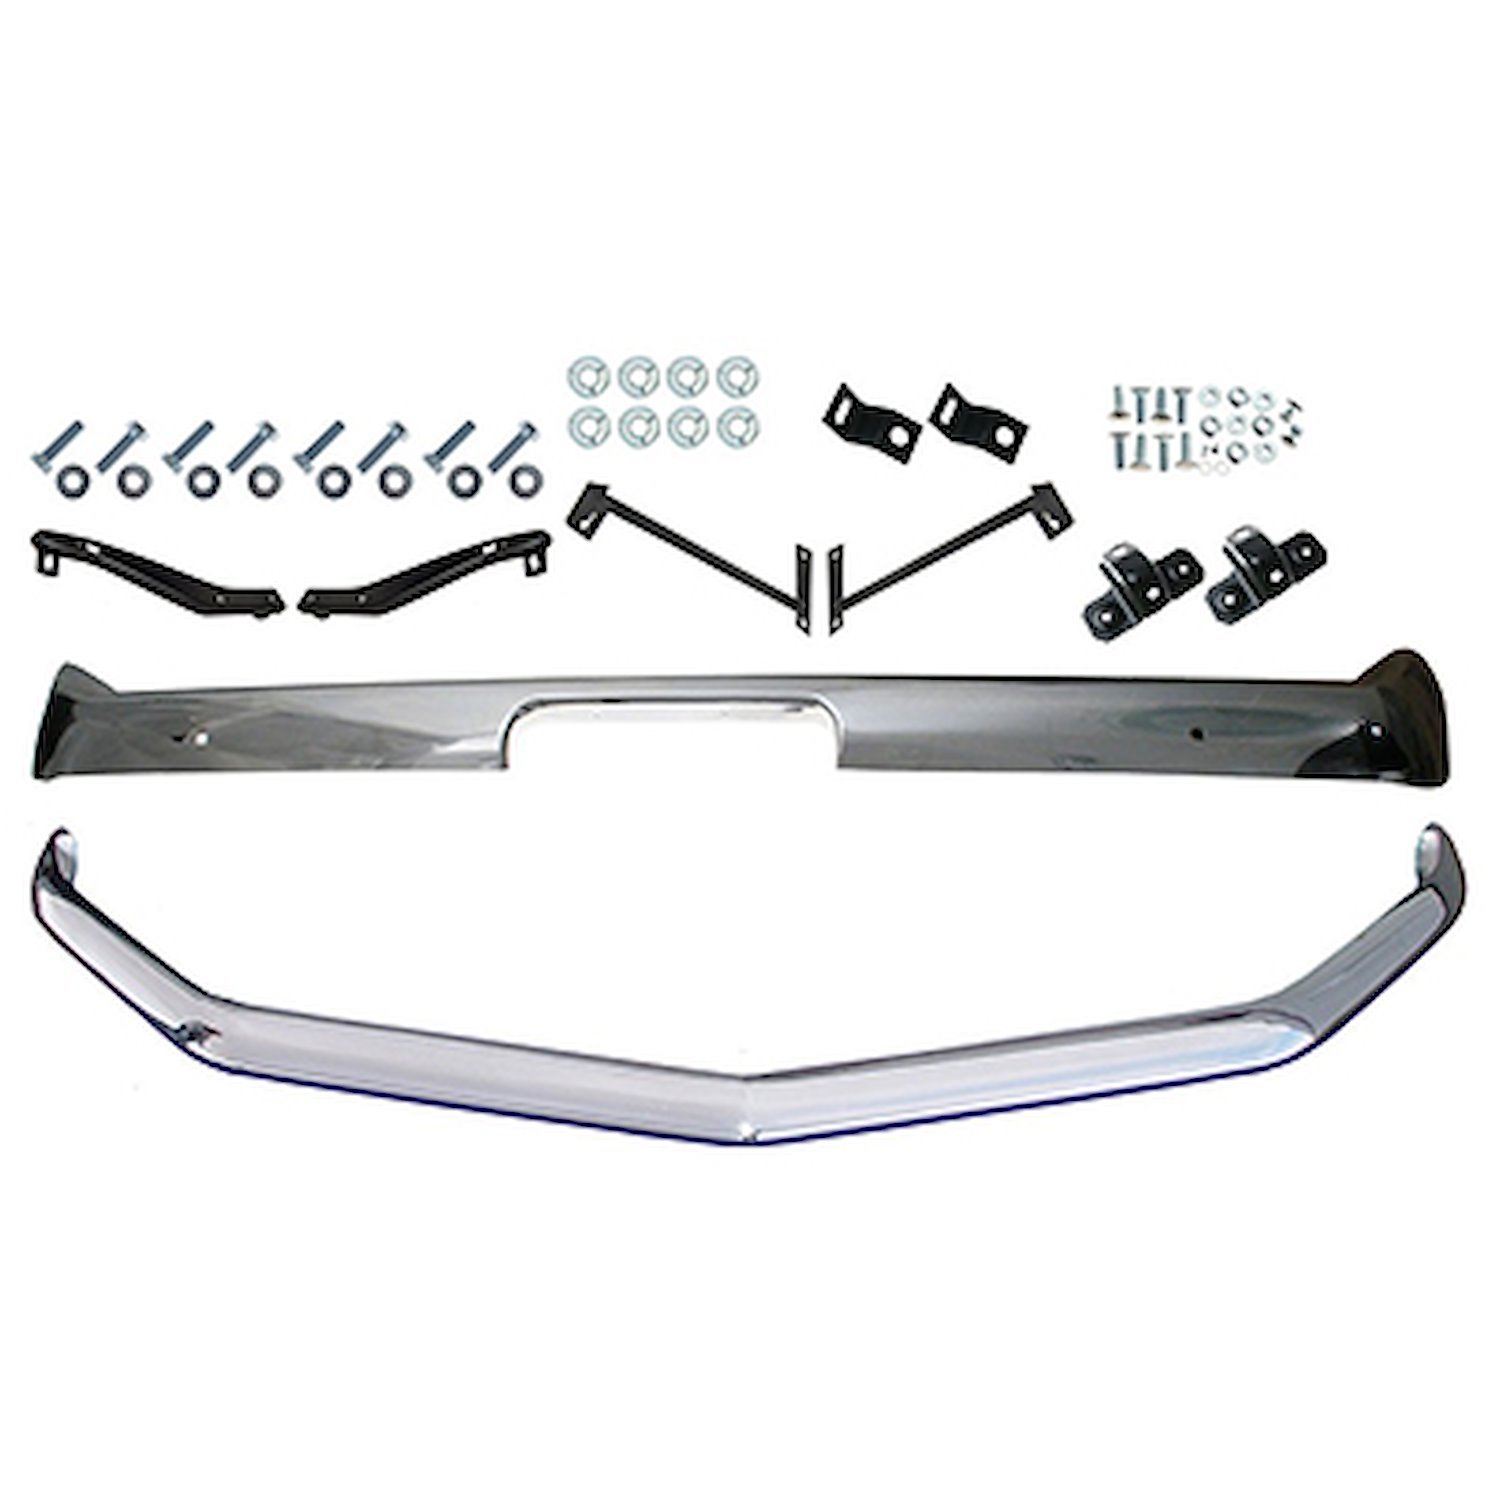 BBK3 Front and Rear Bumper Kit 1969 Mustang With Brackets and Hardware